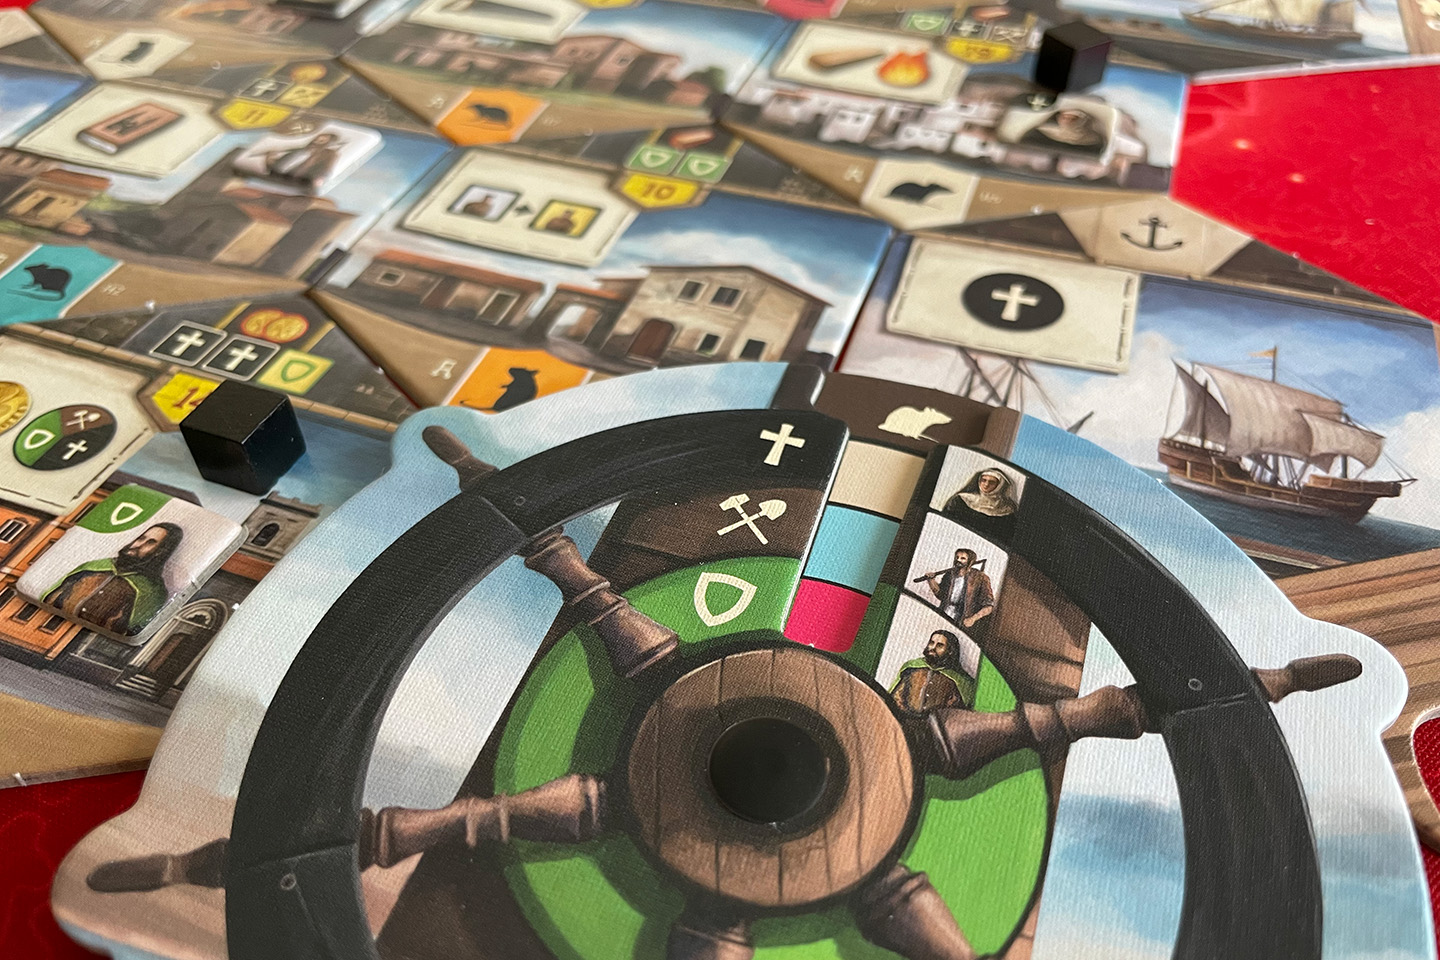 The population wheel is a clever way to randomize the game board every round.